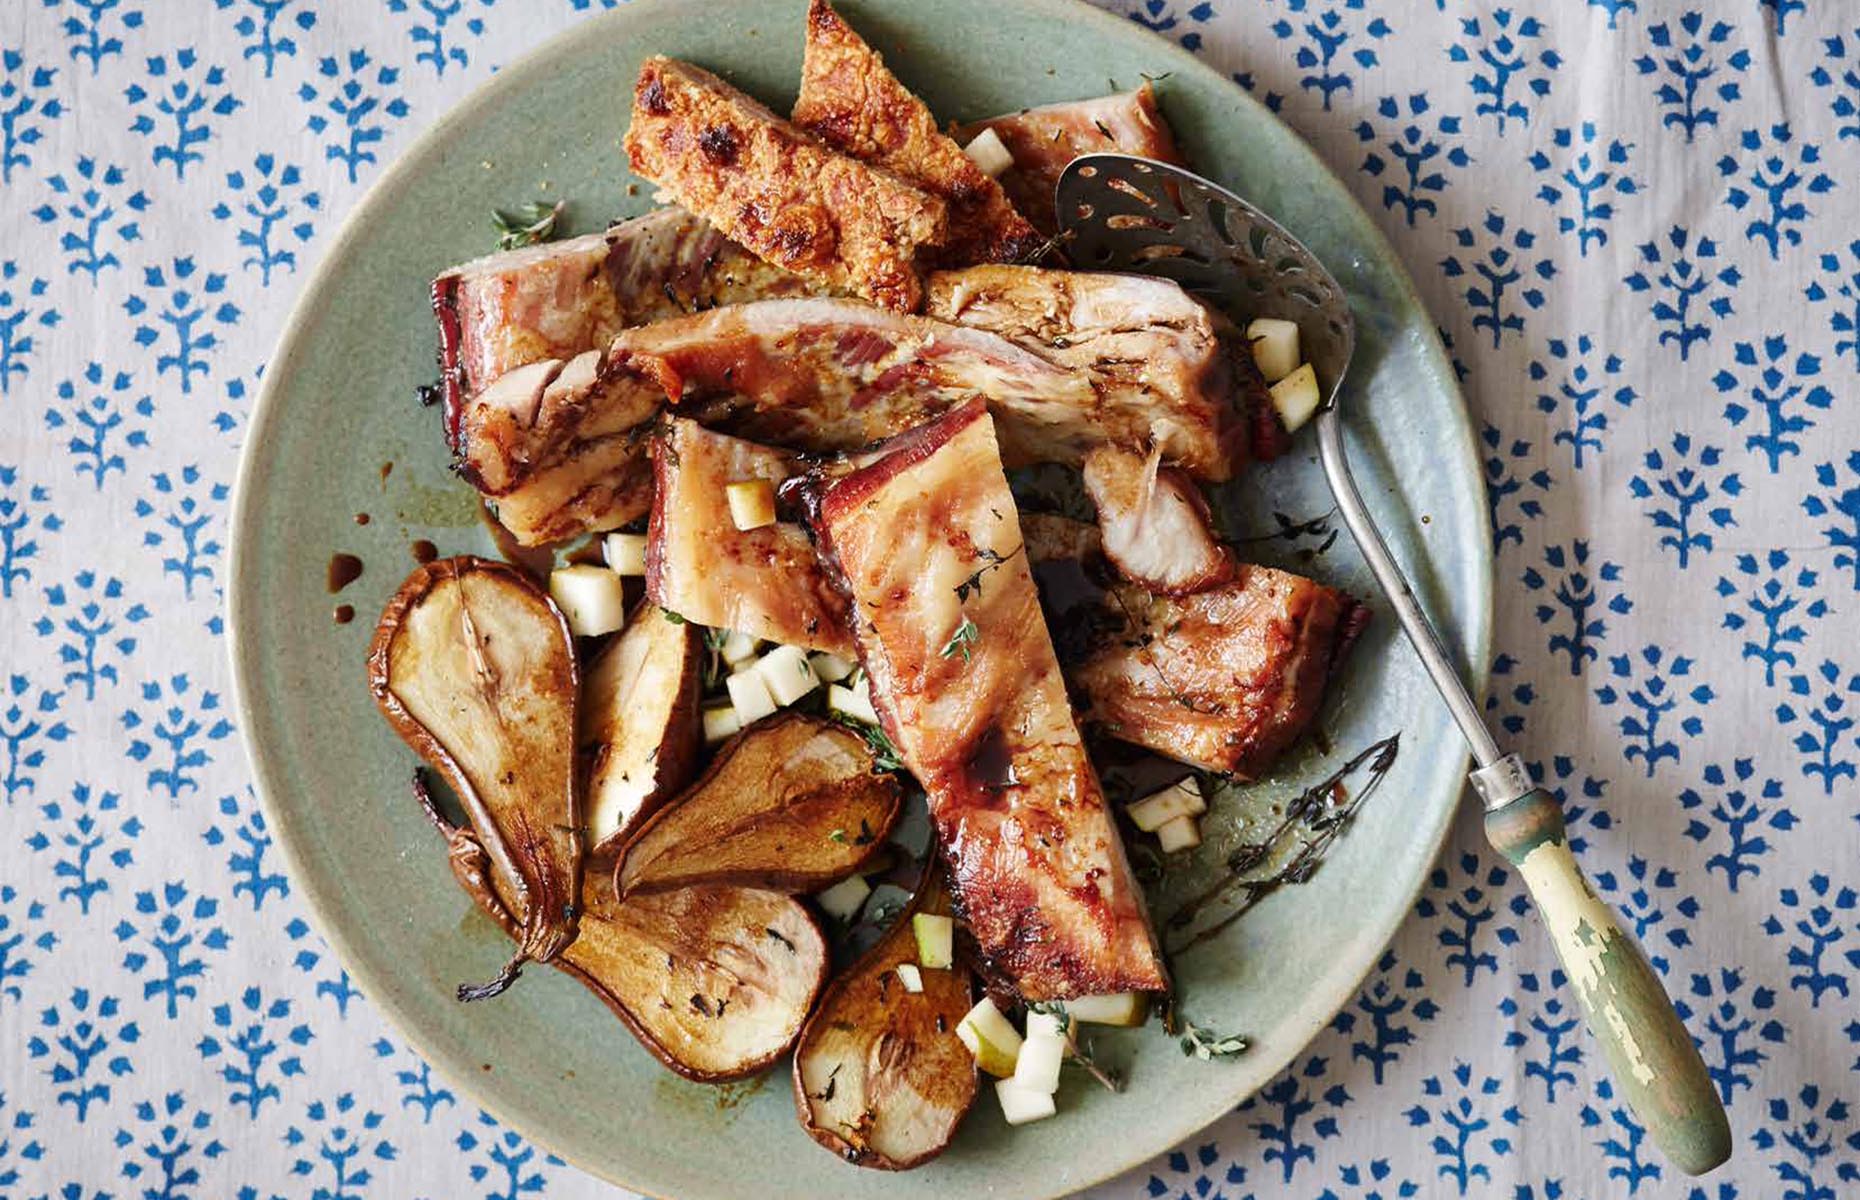 Roasted pork belly with pears and thyme (Image: The Really Quite Good British Cookbook/Nourish Books)